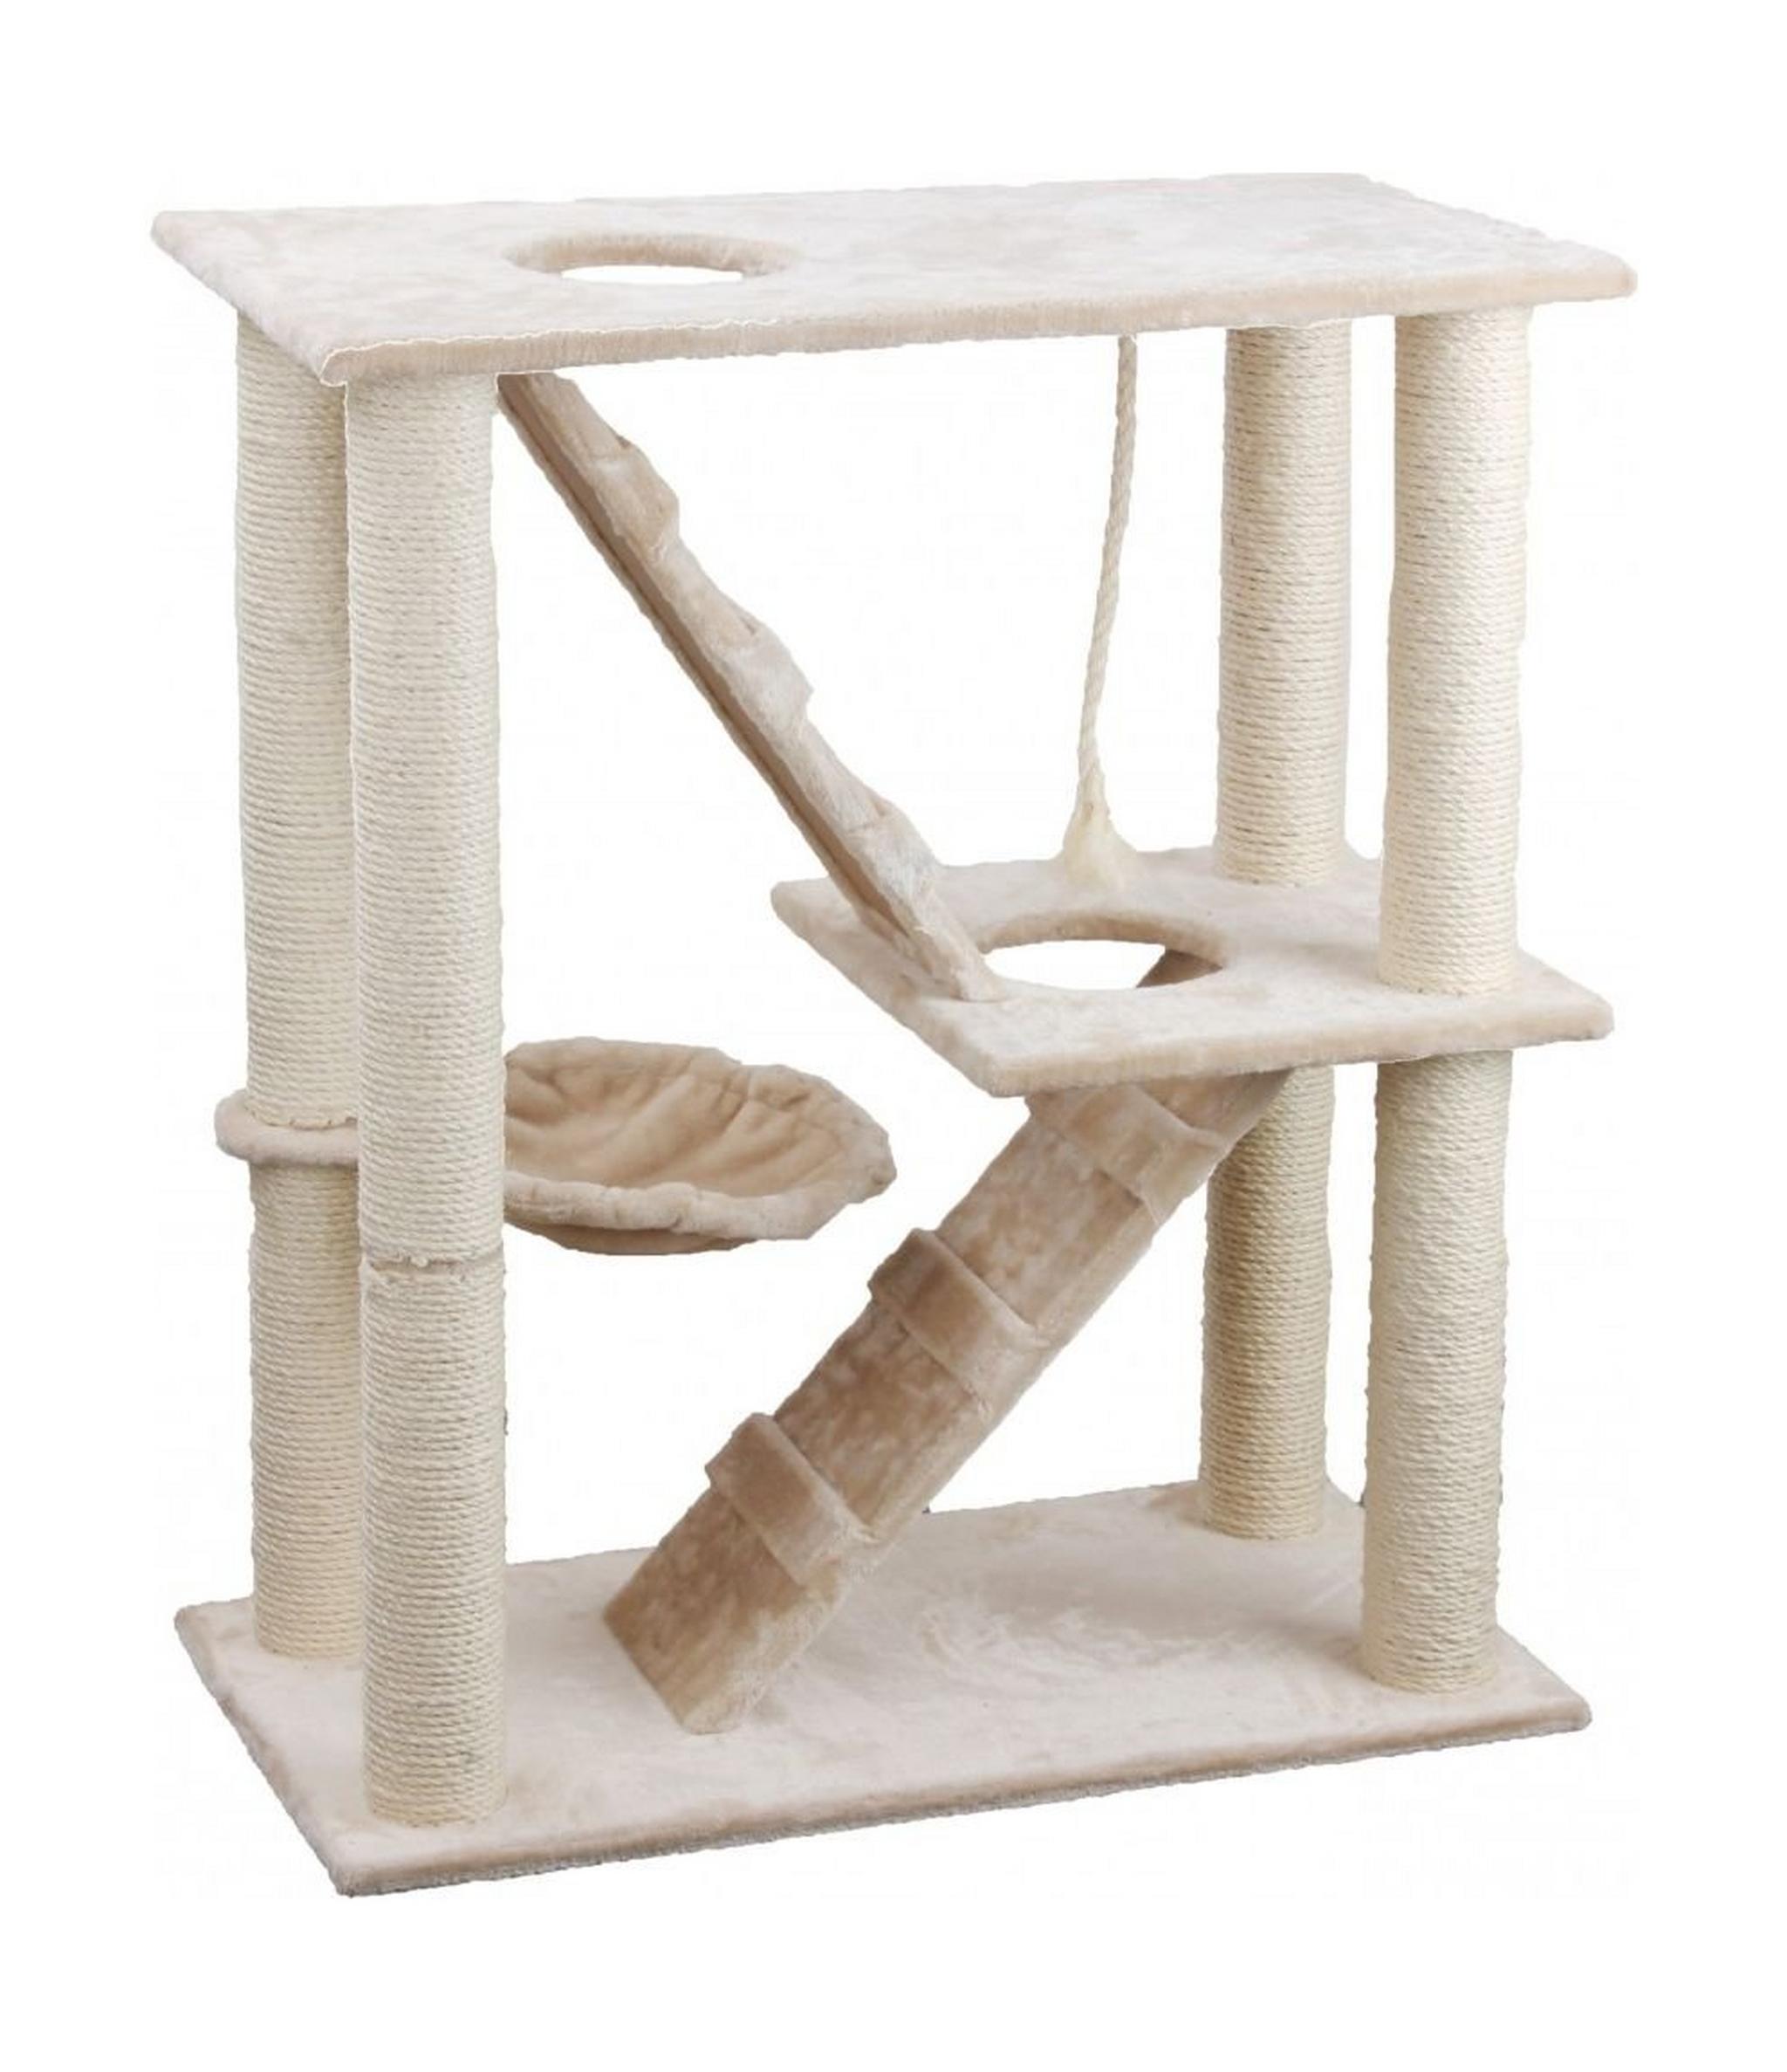 The Pawise Kitty Place II Cat Scratching Post